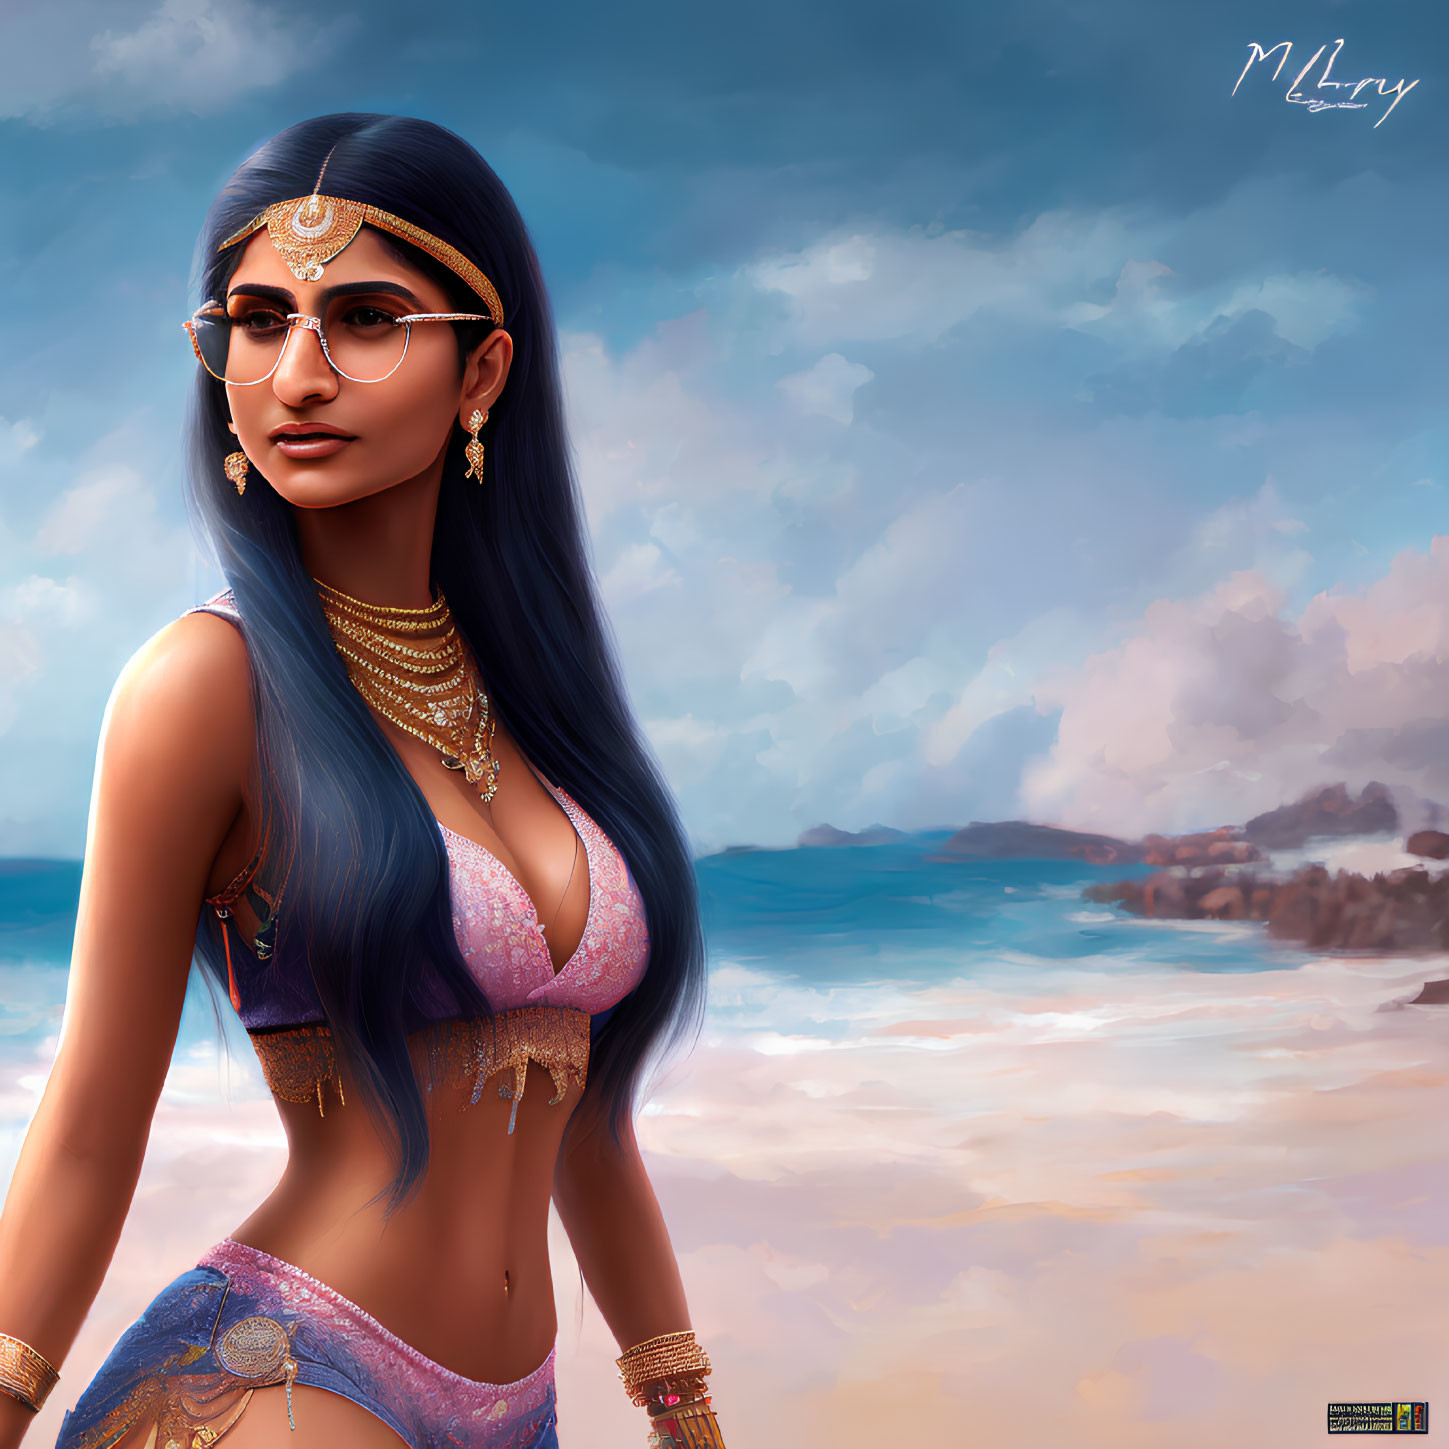 Illustrated woman in glasses wearing traditional Indian outfit on beach with cloudy sky